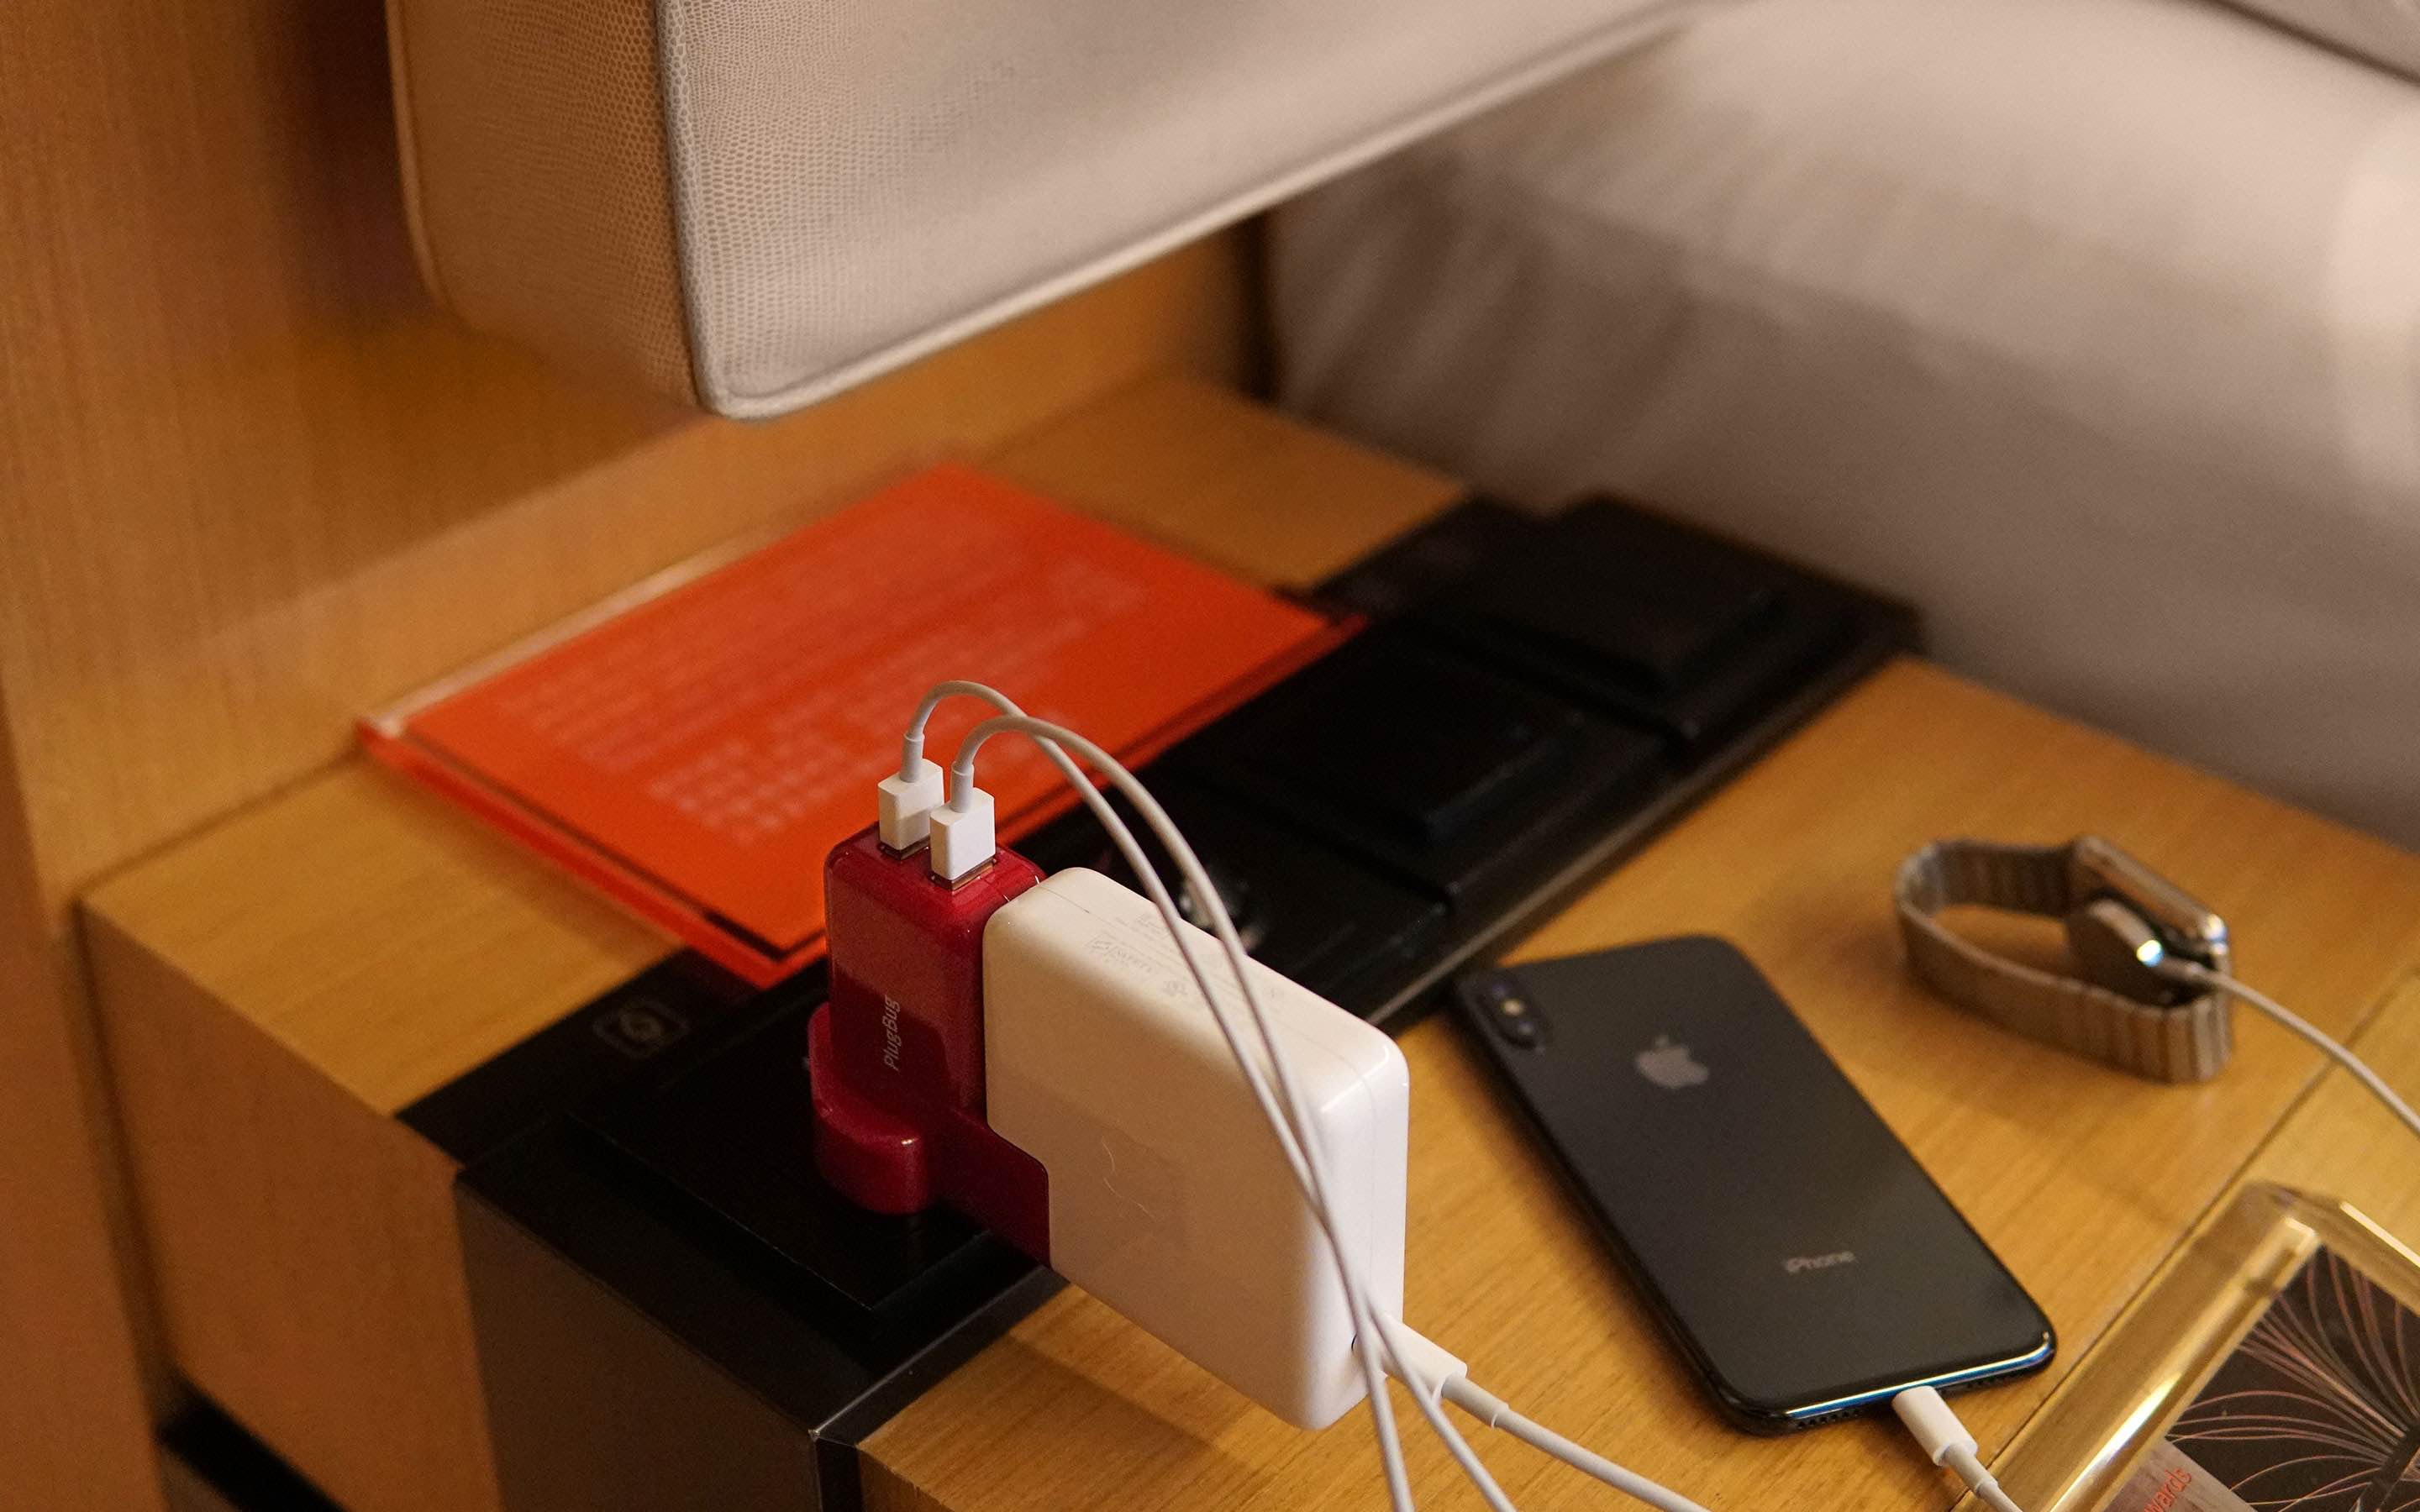 PlugBug Duo from Twelve South shown charging an Apple Watch and an iPhone X at the same time via its two USB Type-A ports